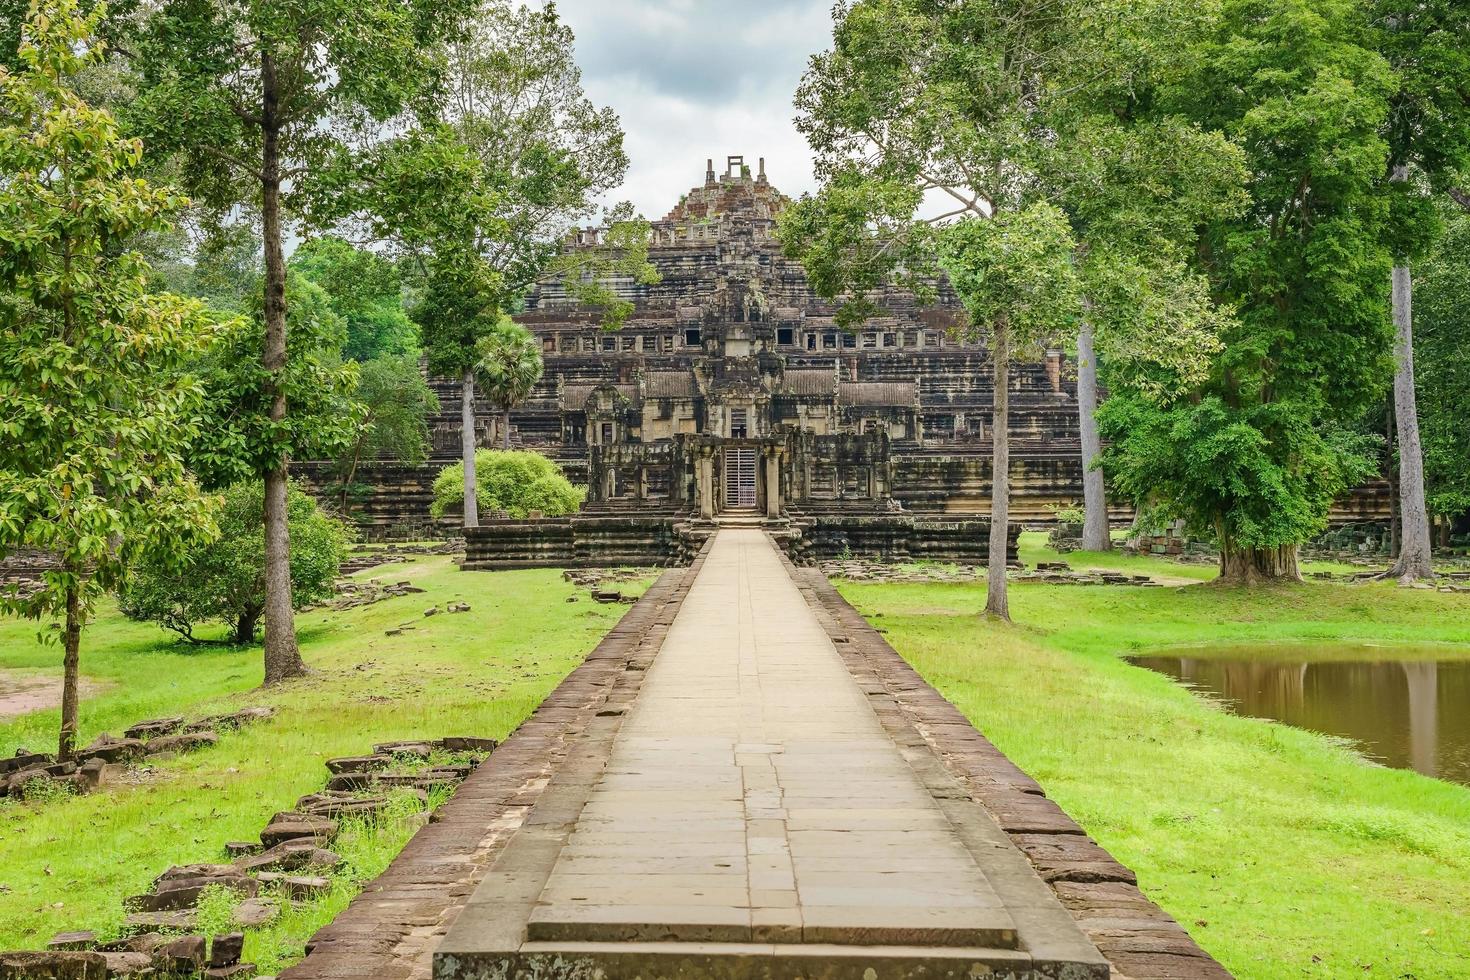 View of The Baphuon temple, Angkor Thom, Siem Reap, Cambodia photo